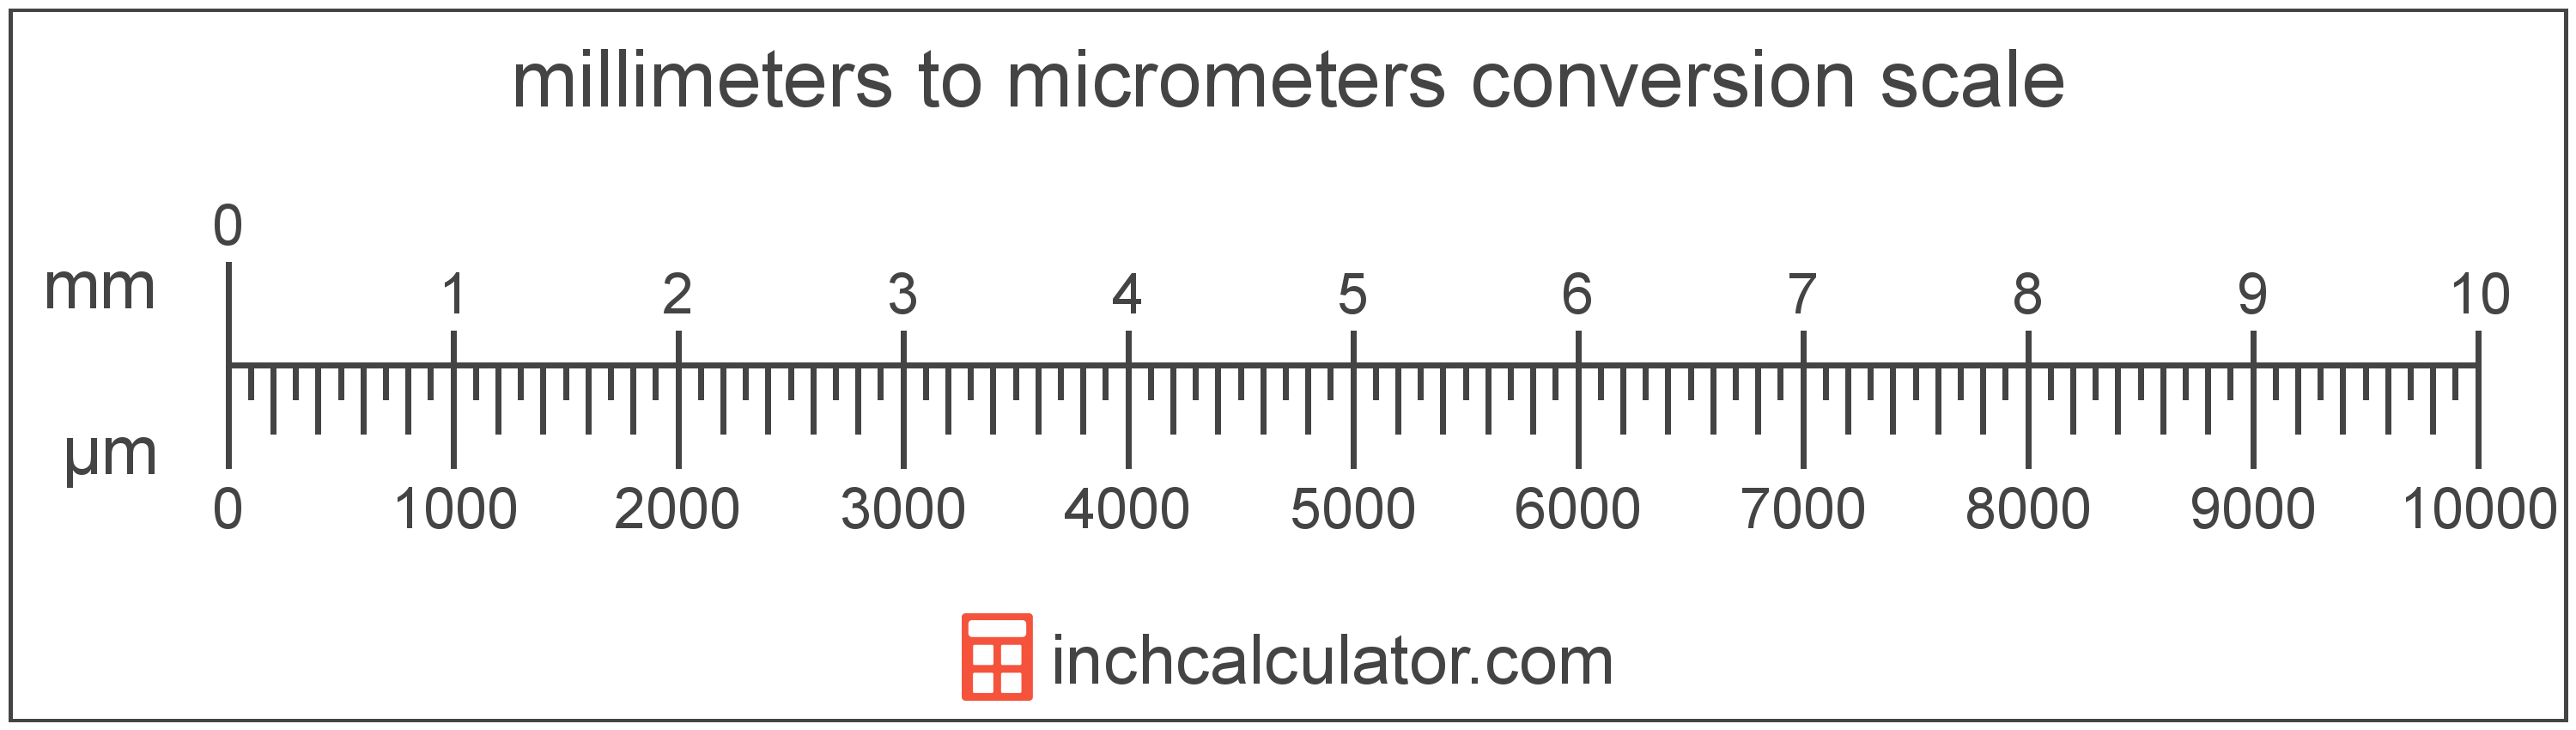 Mil To Micron Conversion Chart